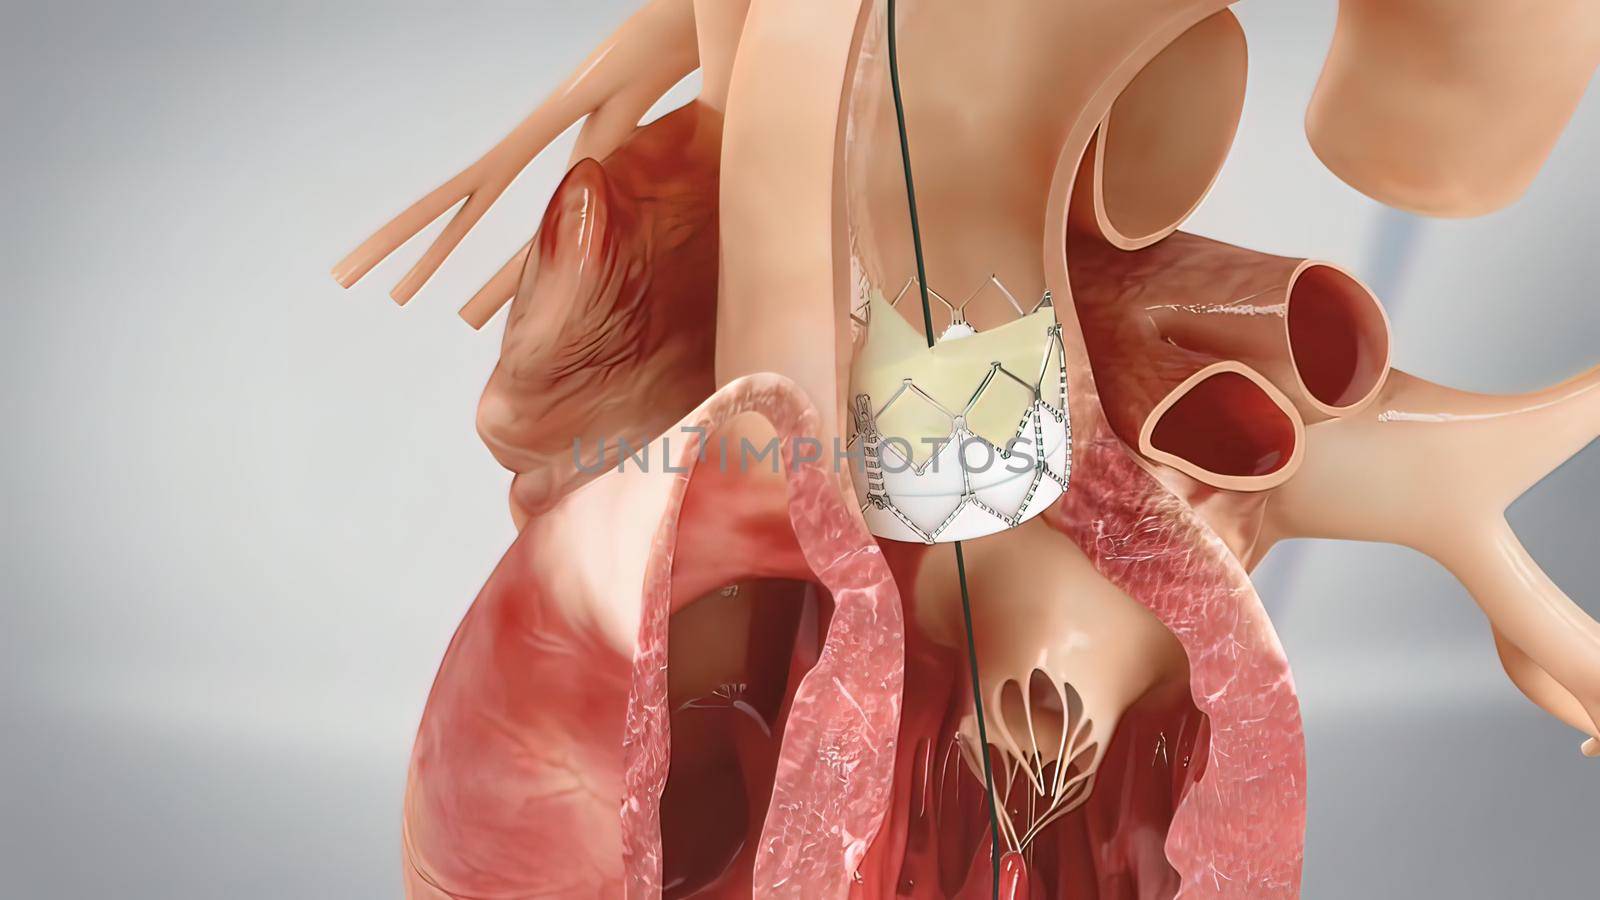 Coronary angioplasty is a procedure used to widen blocked or narrowed coronary arteries the main blood vessels supplying the heart. 3D illustration